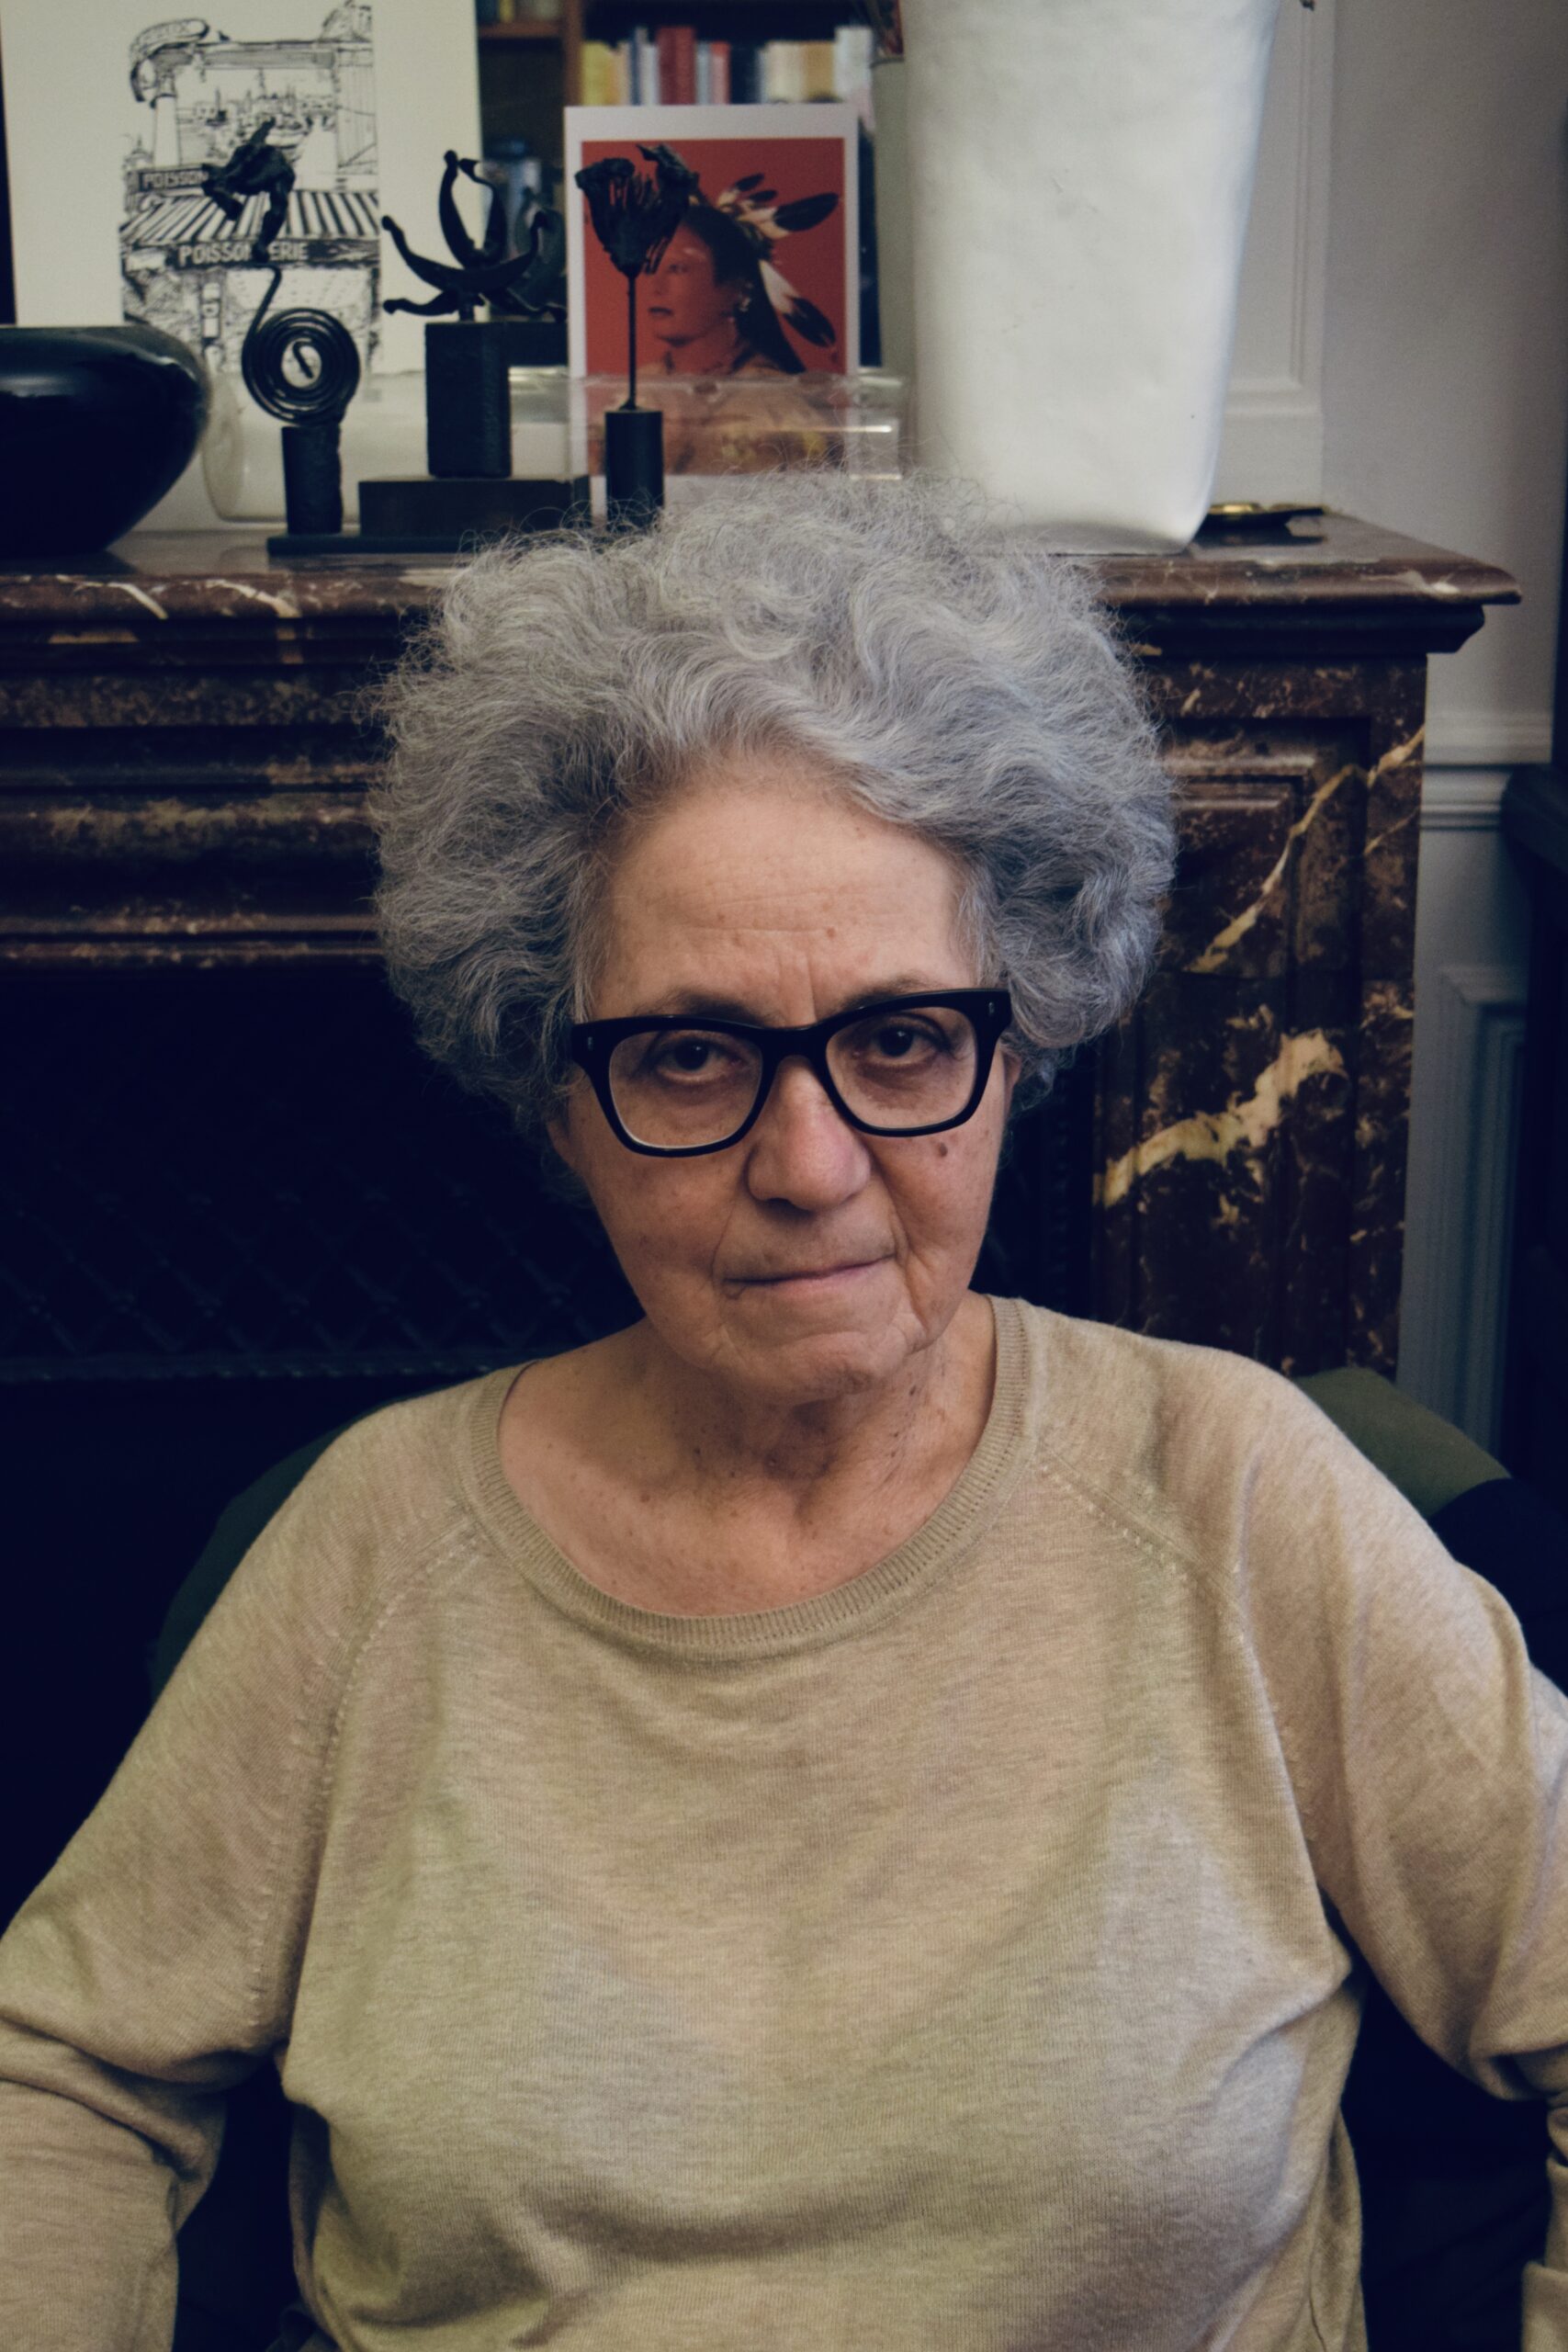 Three-quarter frame portrait of woman with gray hair and black-framed glasses